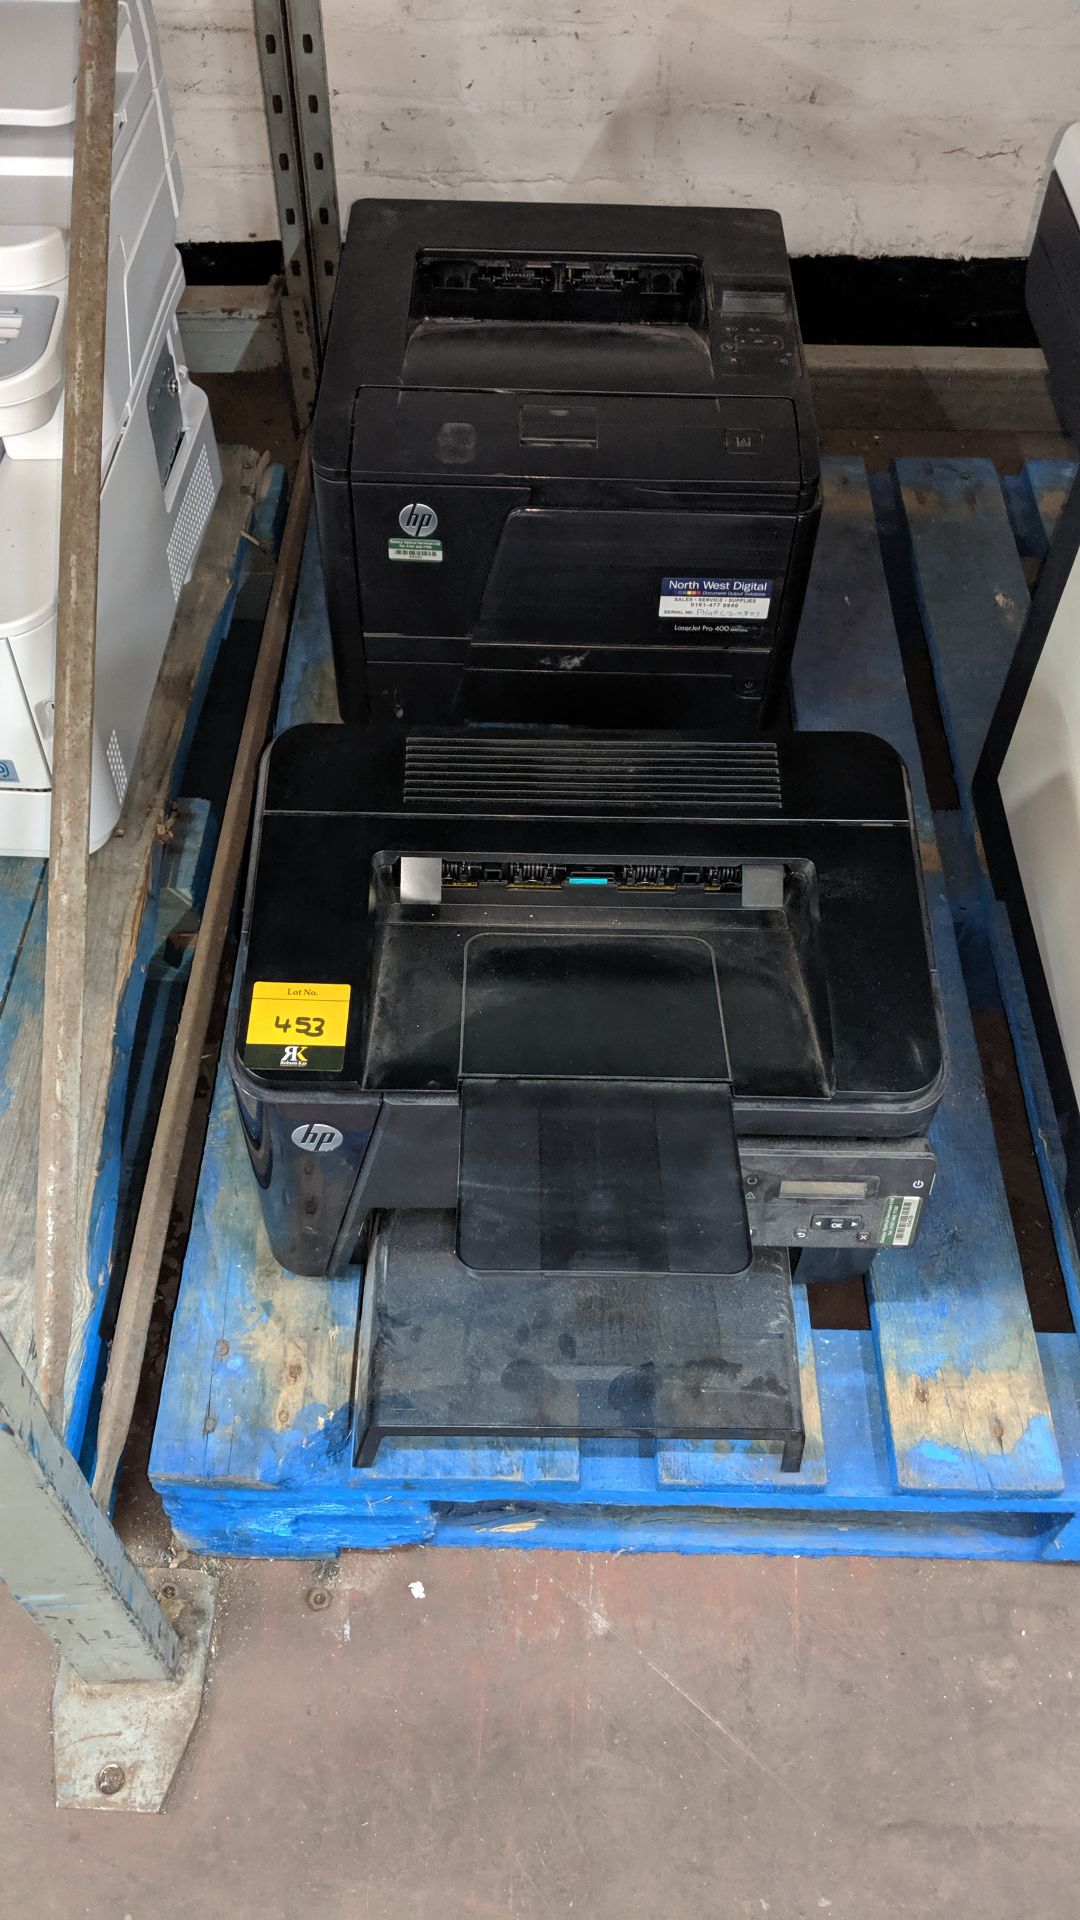 2 off assorted compact HP printers. This is one of a large number of lots being sold on behalf of